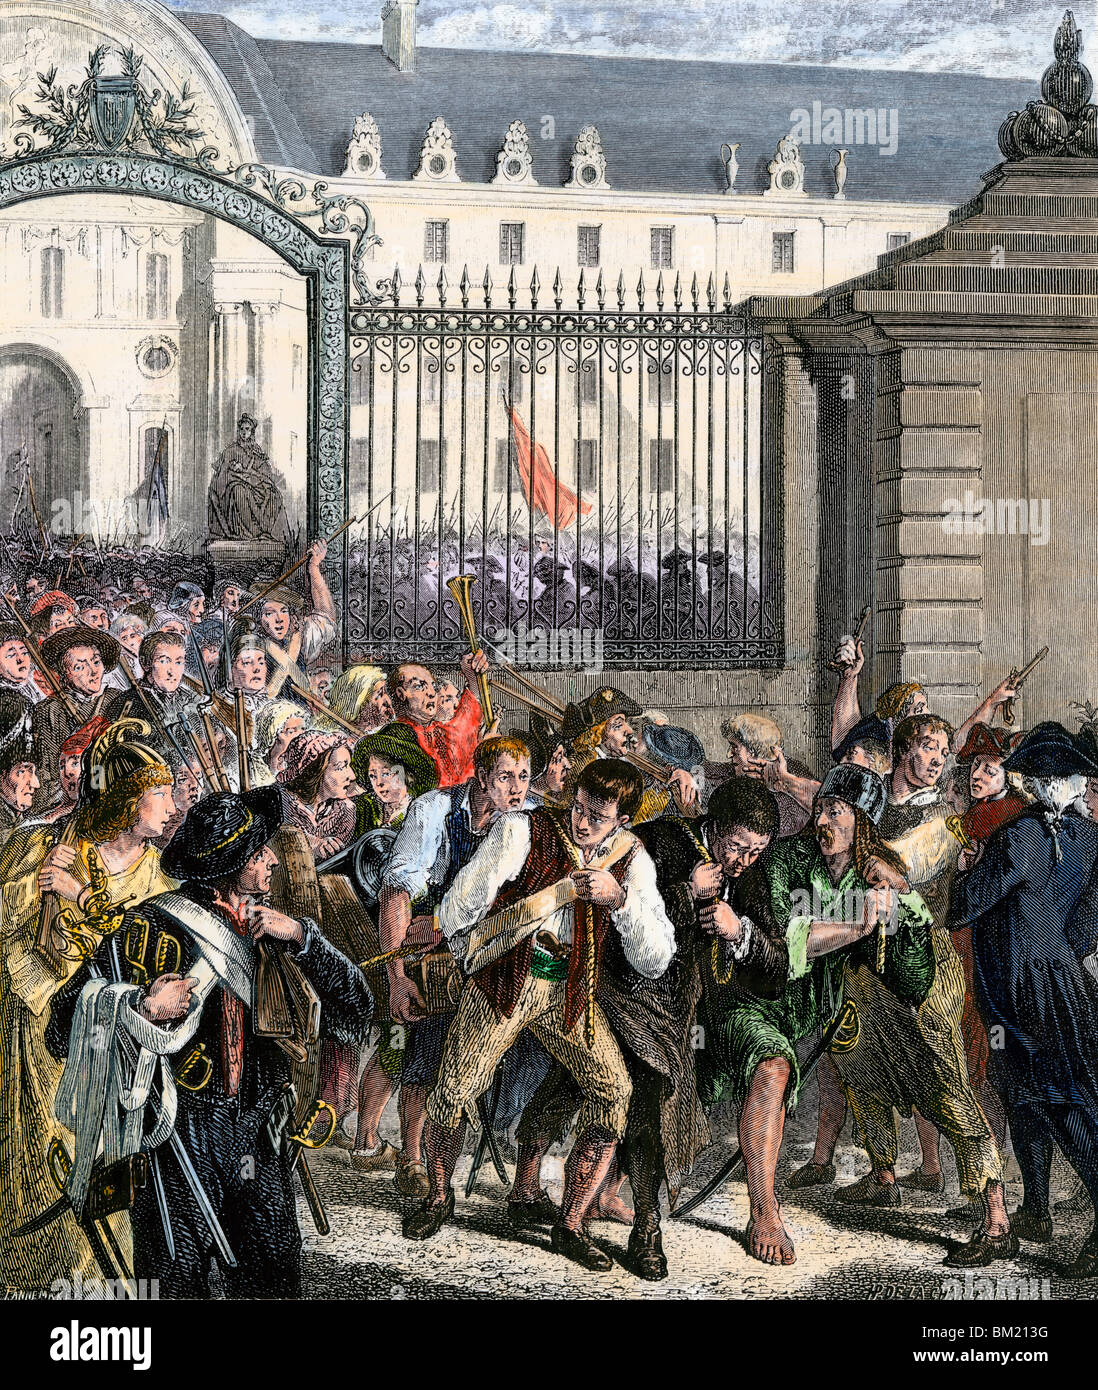 Revolutionaries seizing weapons at Les Invalides before storming the Bastille, French Revolution, 1789. Hand-colored woodcut Stock Photo